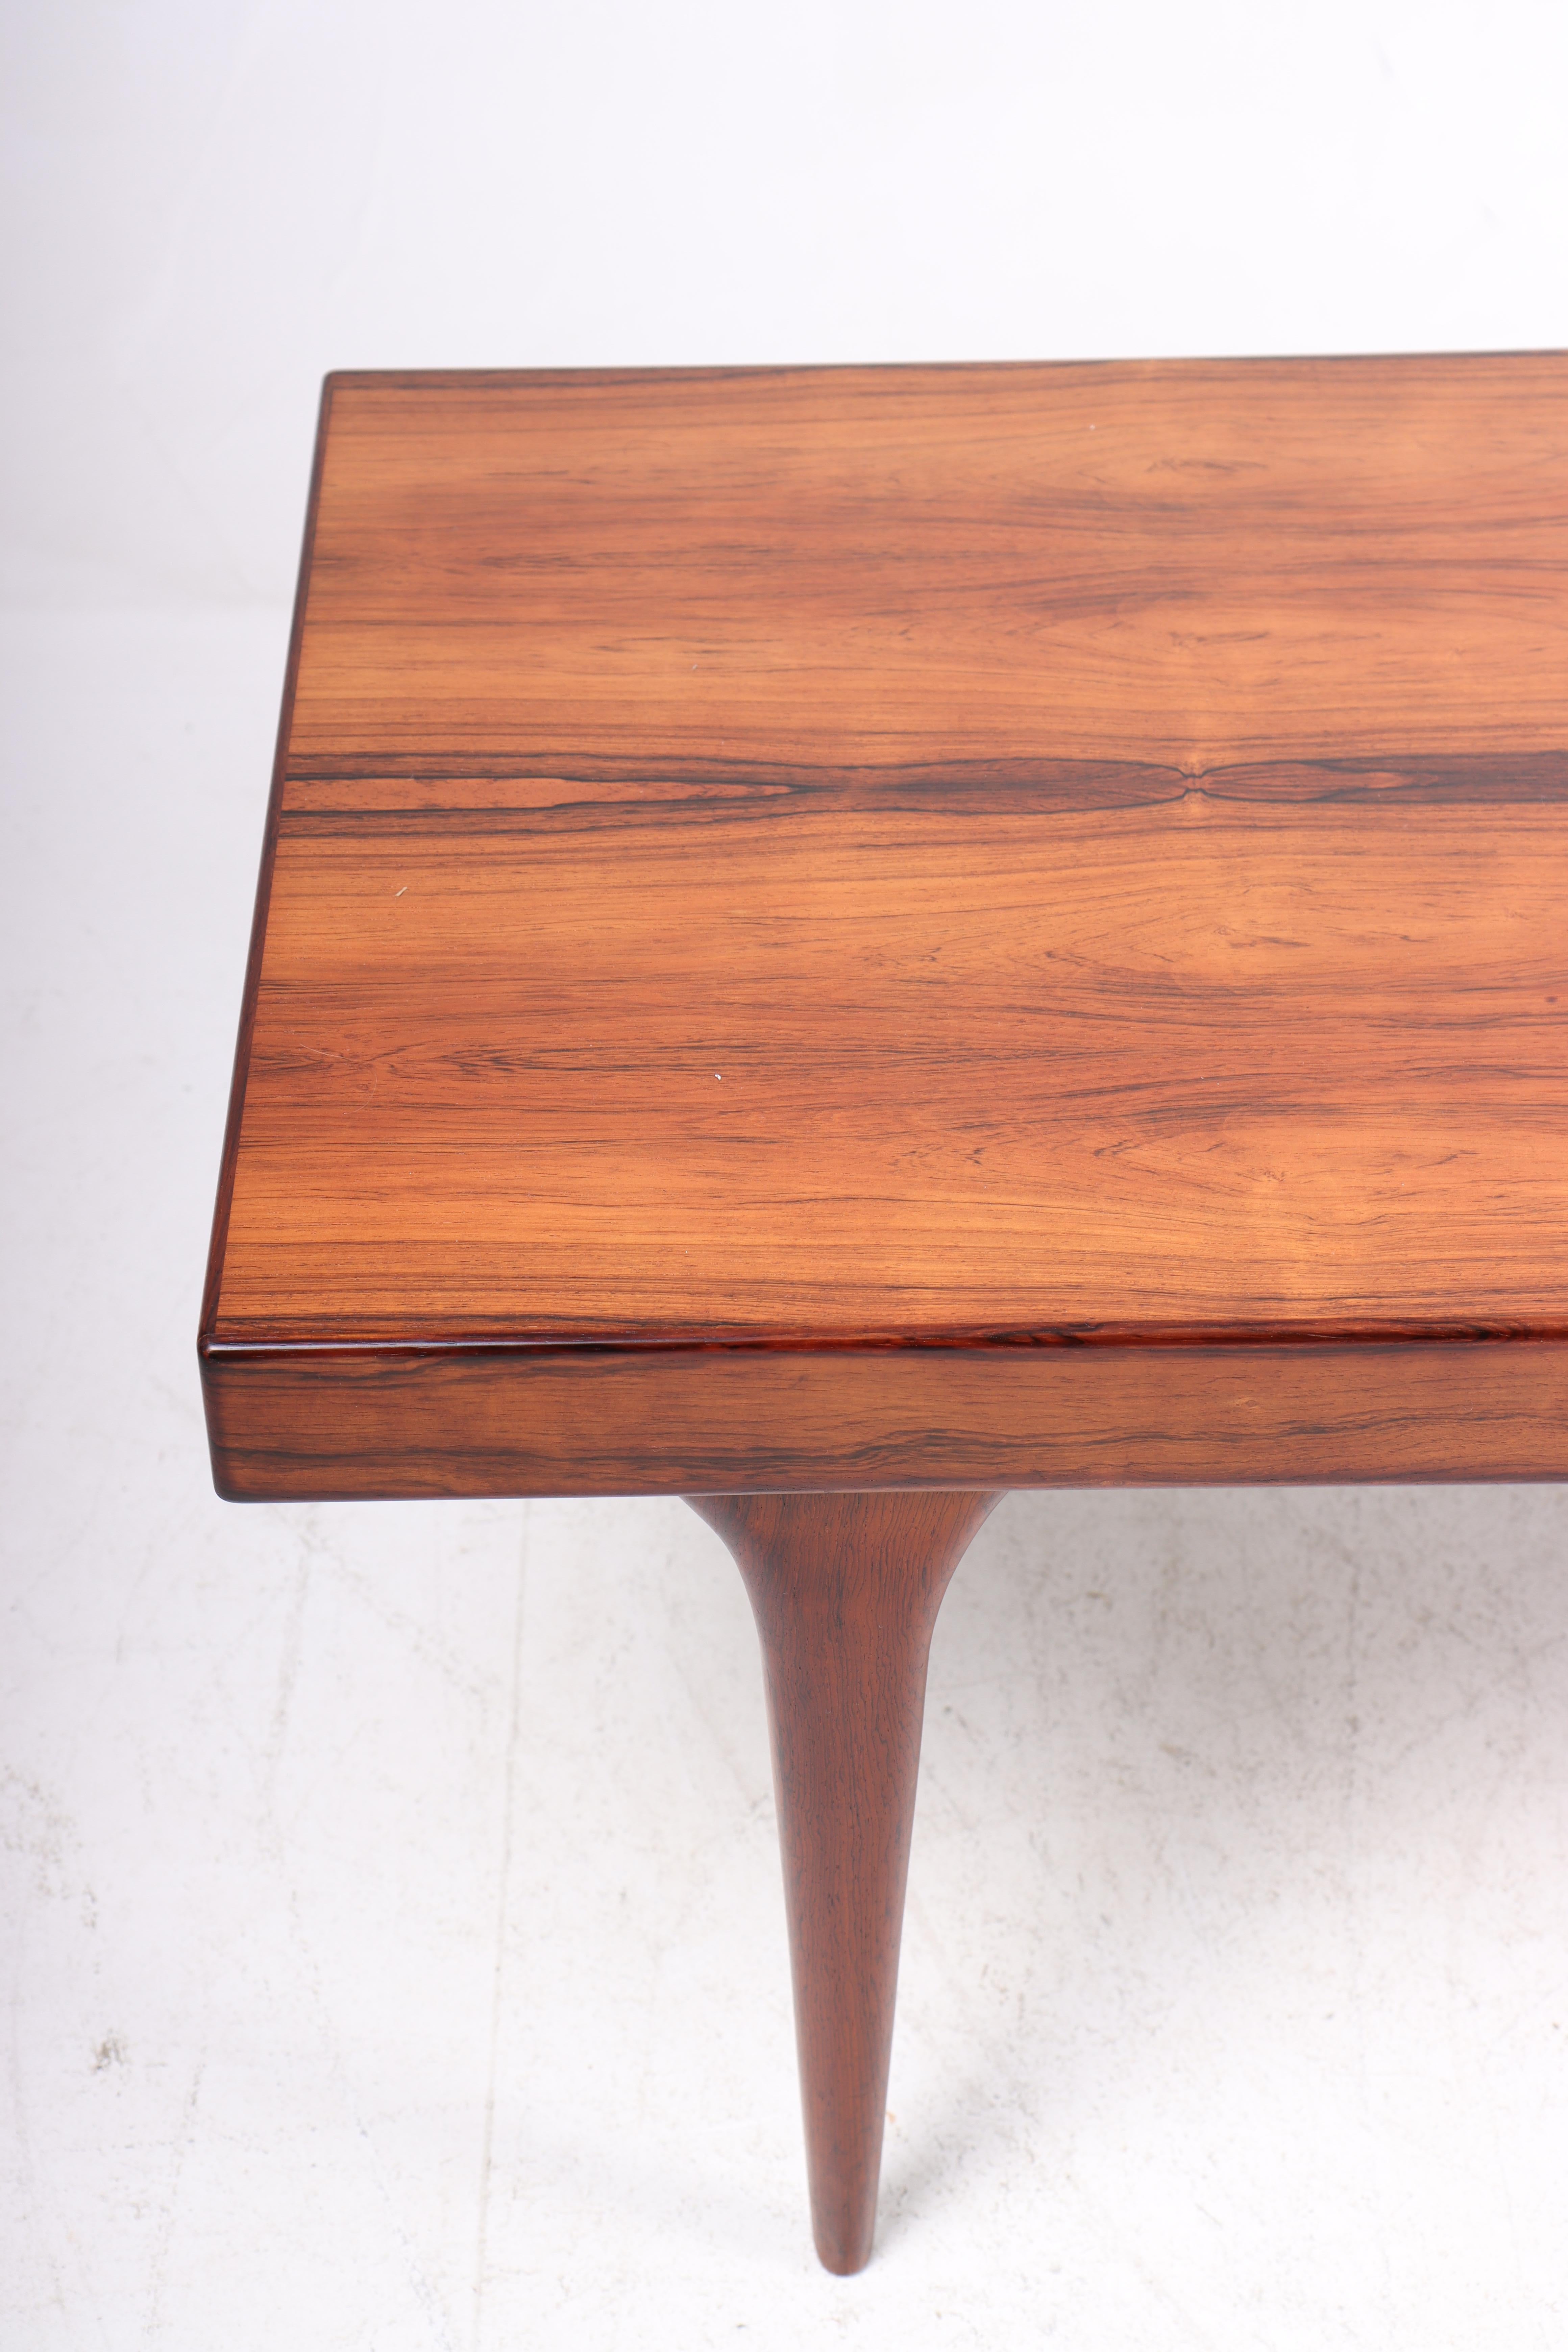 Midcentury Low Table in Rosewood, Designed by Johannes Andersen, Danish Design In Good Condition For Sale In Lejre, DK